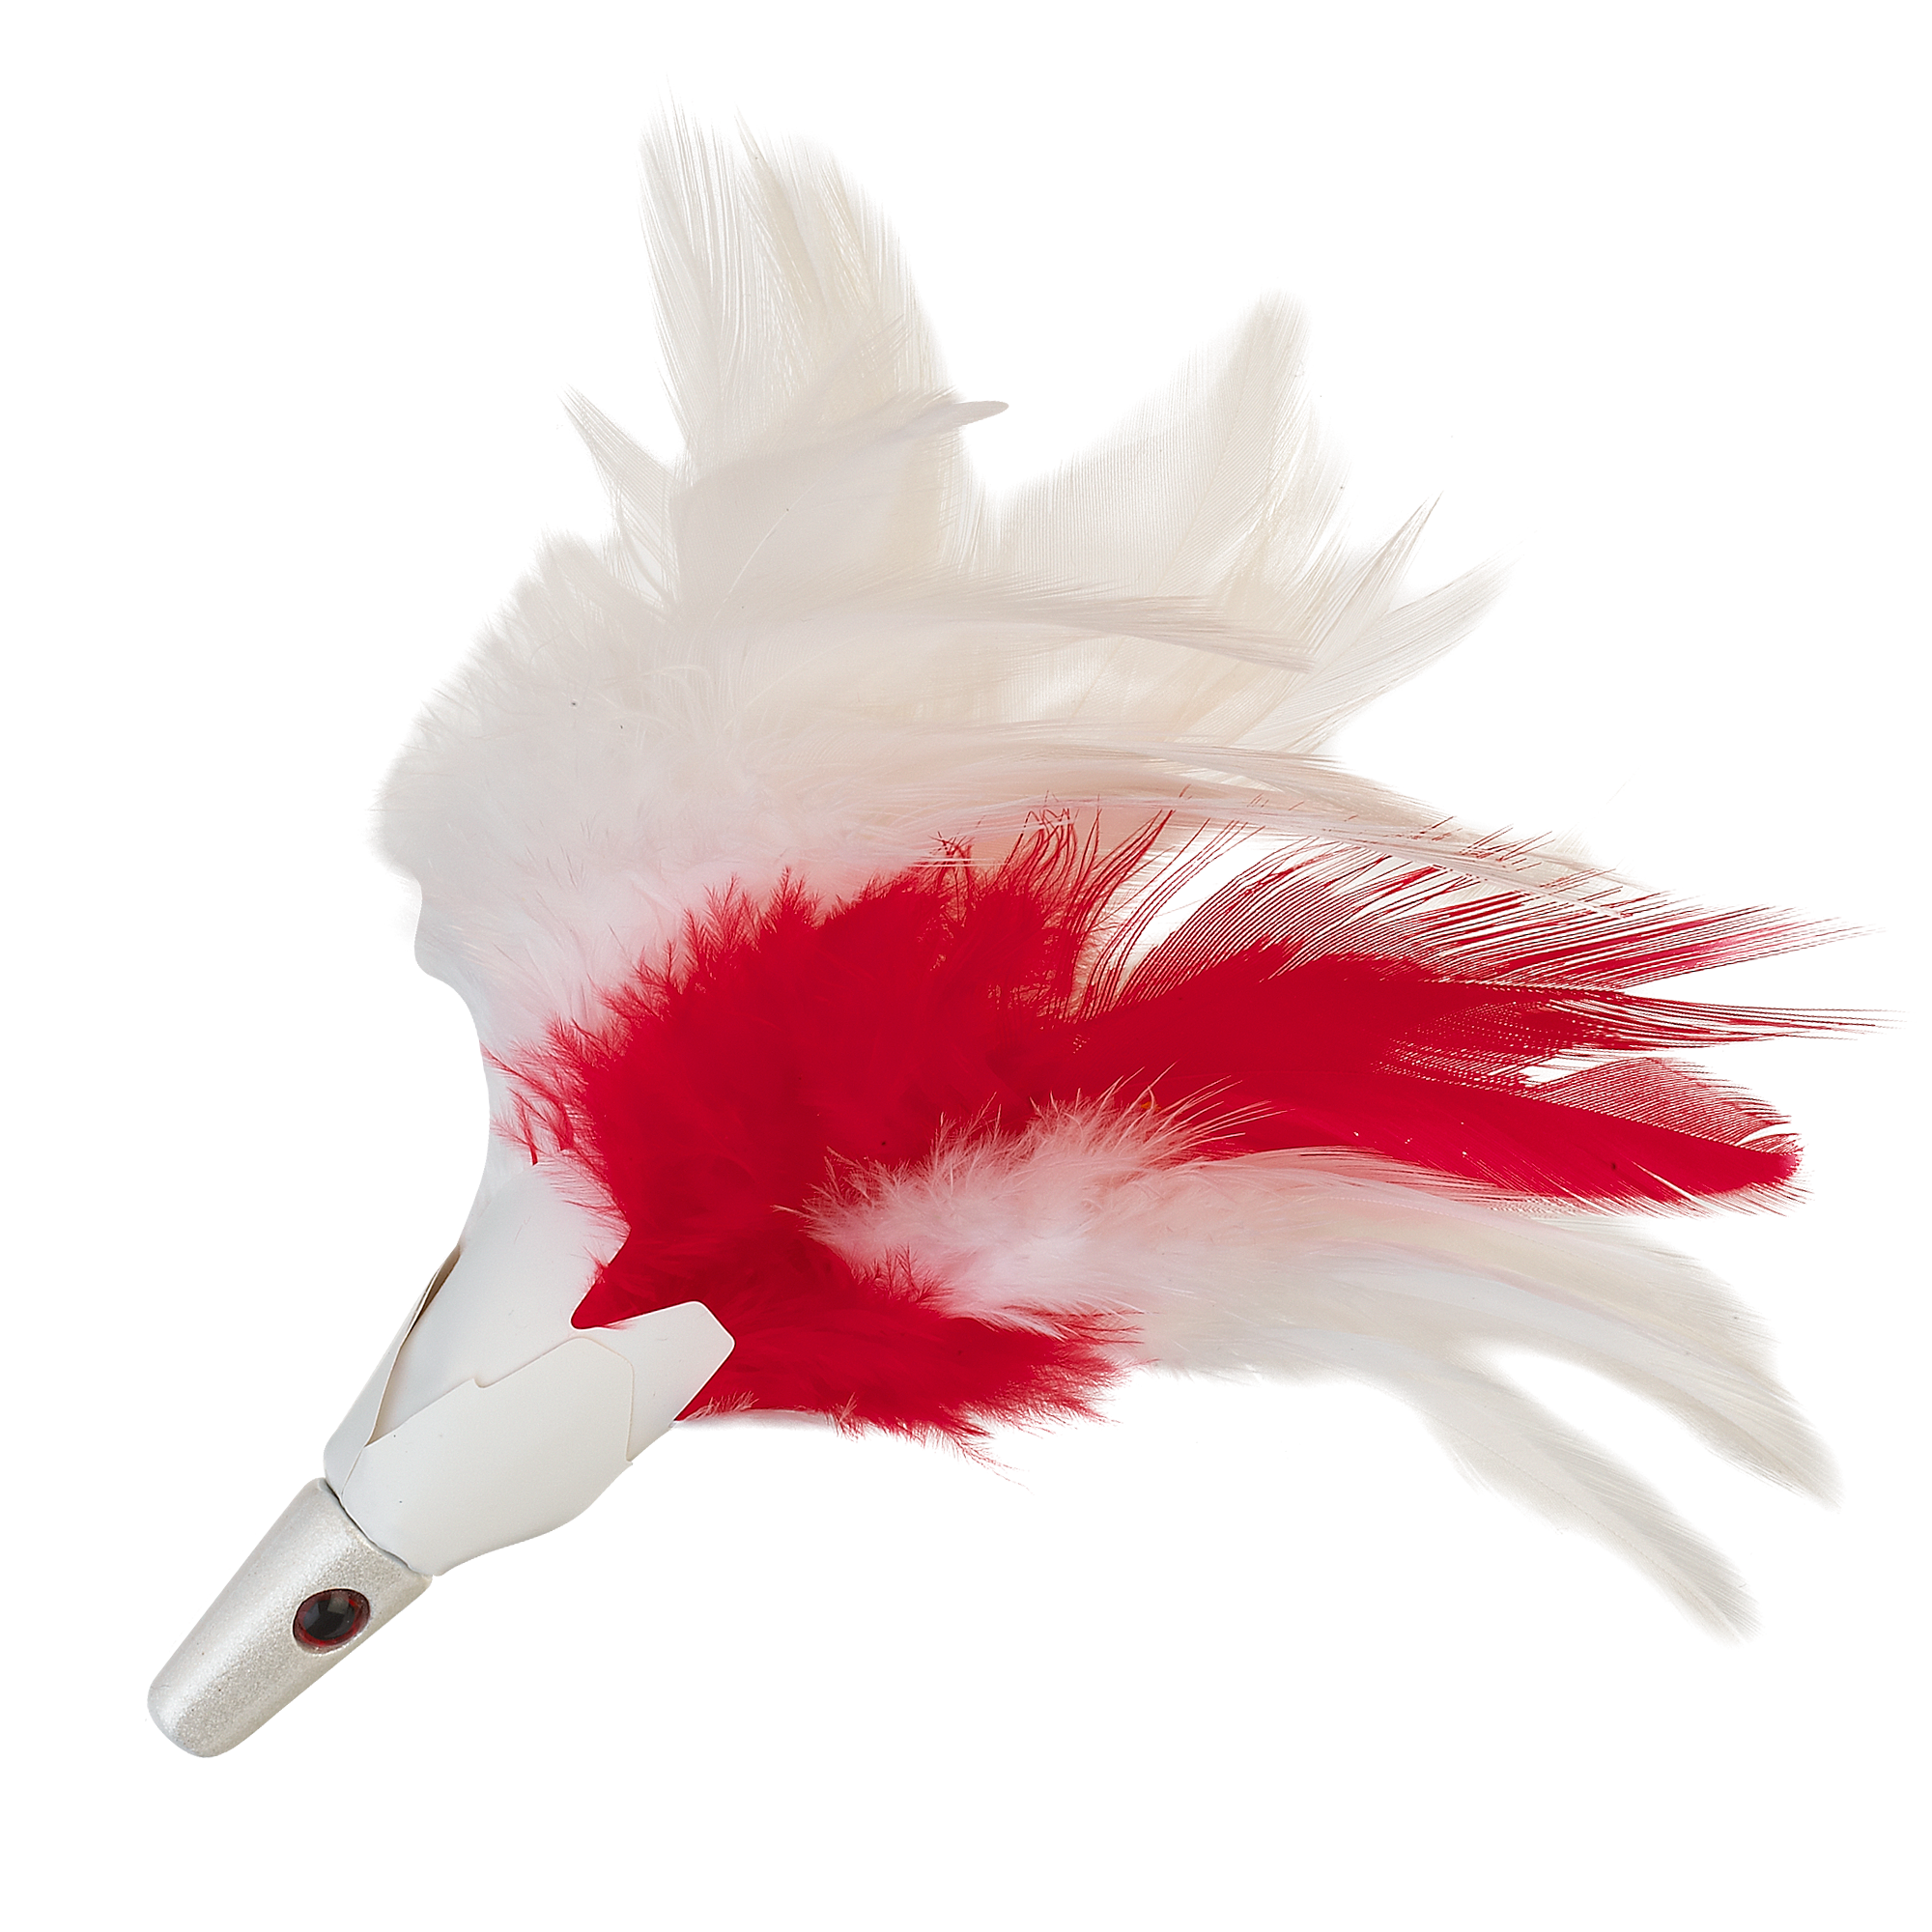 No-Alibi Trolling Feathers - Unrigged - 1/2 oz - Red/White